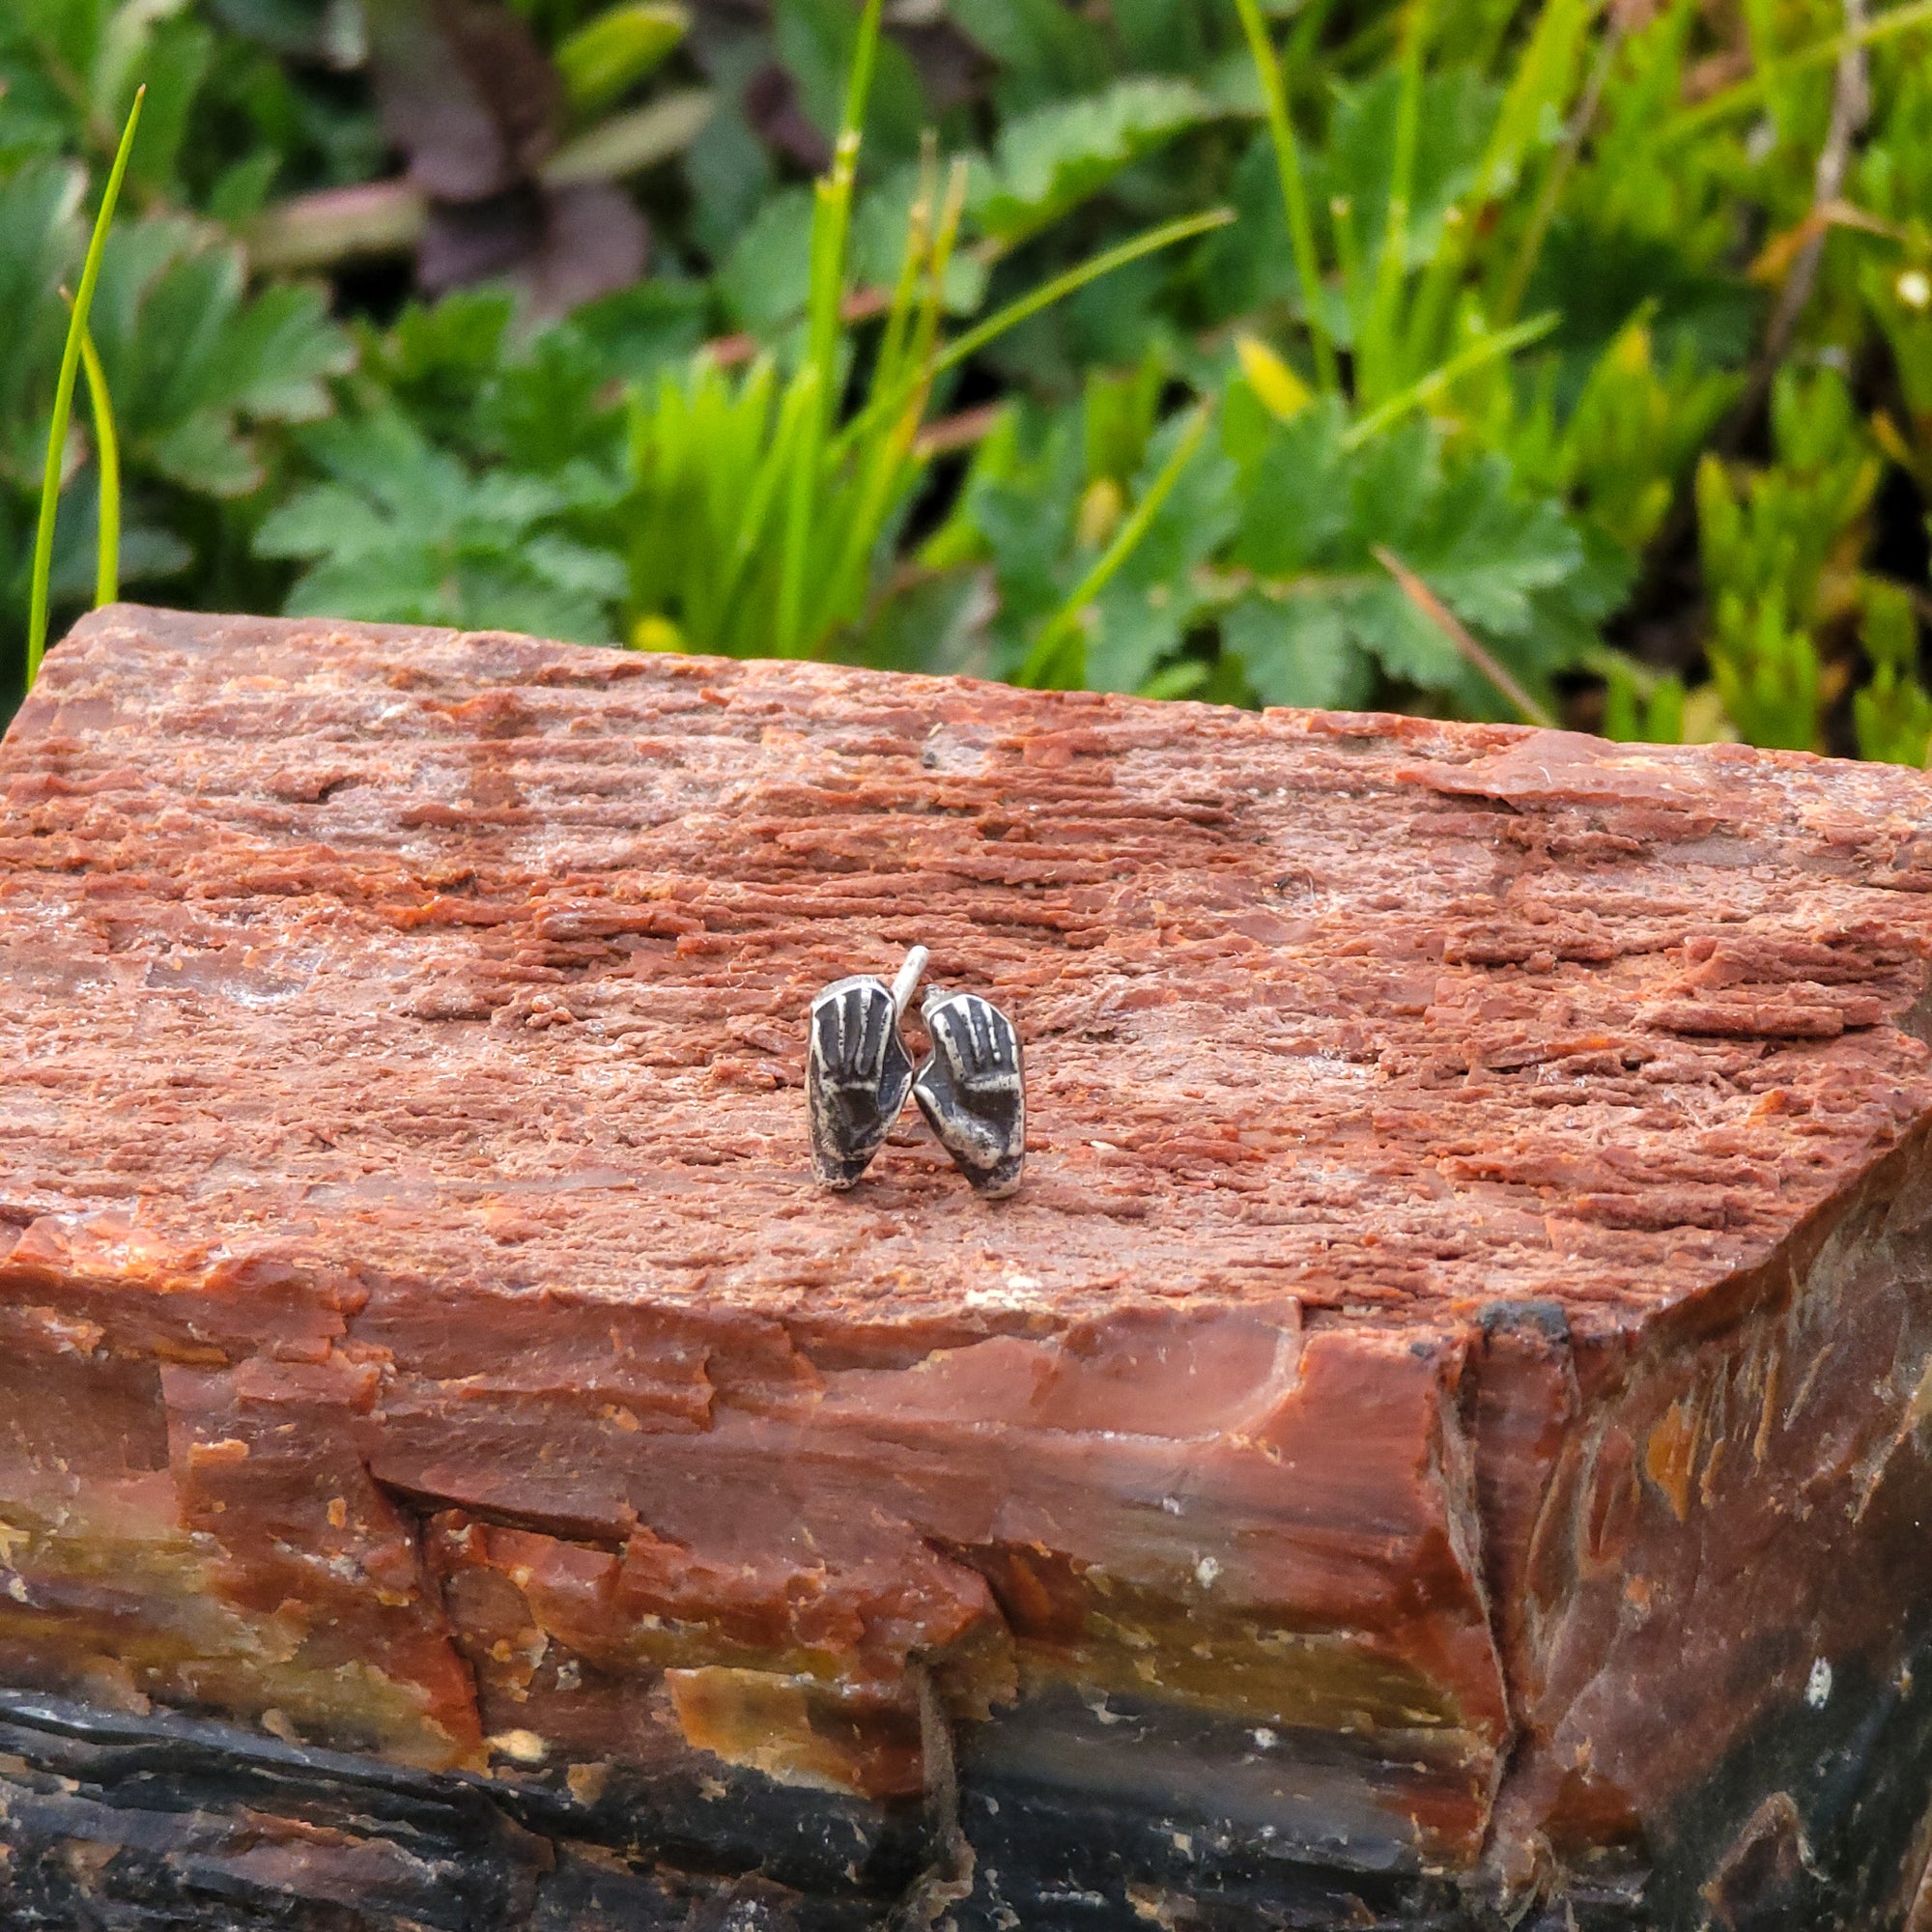 A pair of handmade sterling silver stud earrings in the shape of hands are displayed on a piece of wood. The details of the hands, including the fingers and palms, are delicately crafted. In the background, there are lush green leaves.